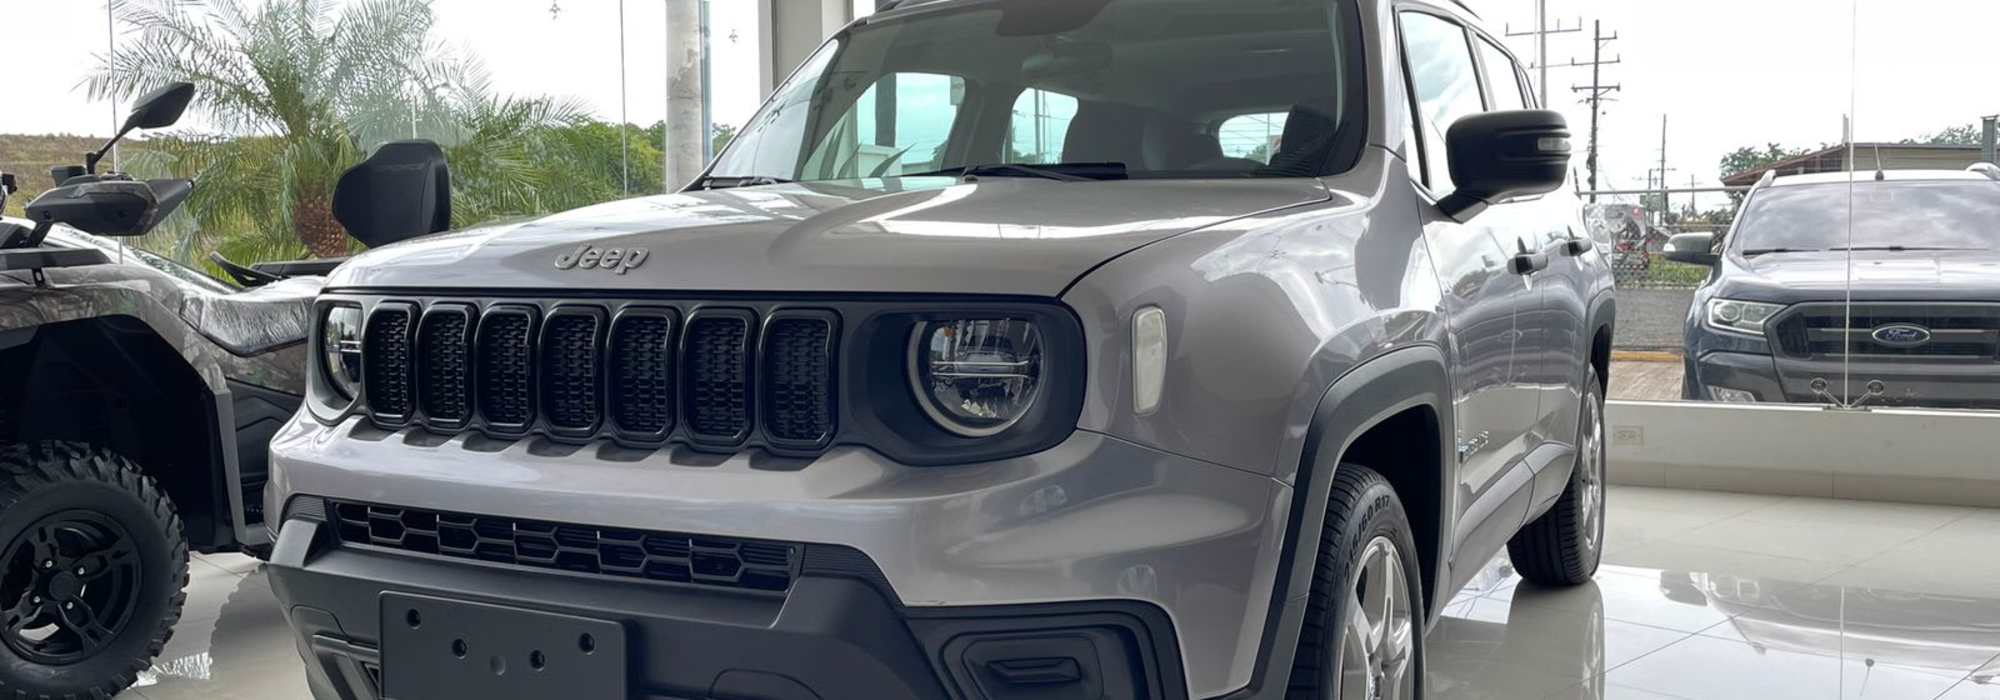 Jeep Renegade from Central de Motores